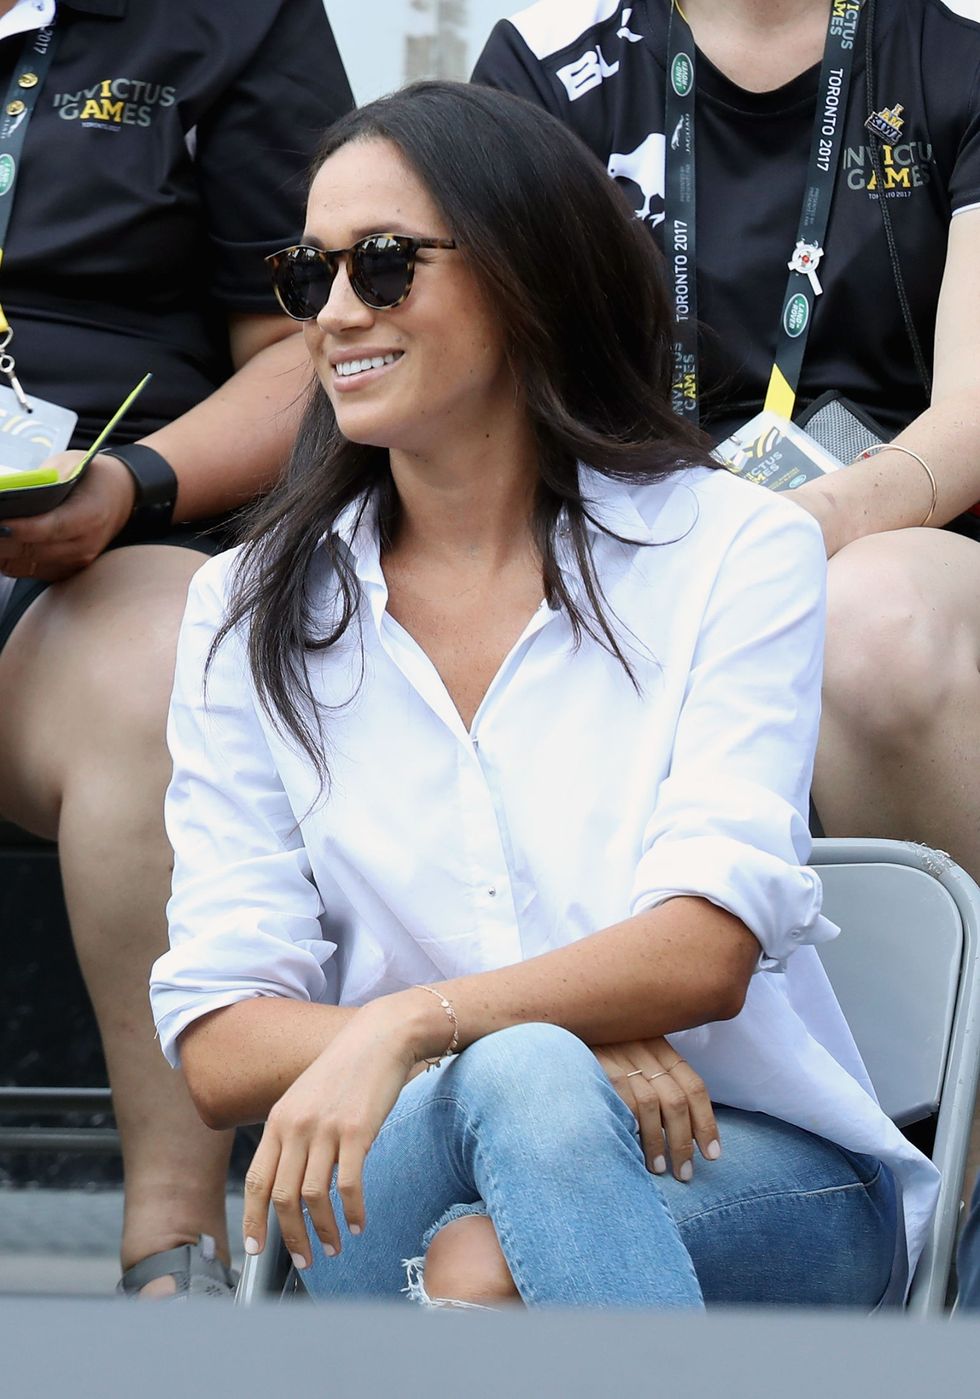 TORONTO, ON - SEPTEMBER 25:  Meghan Markle attends a Wheelchair Tennis match during the Invictus Games 2017 at Nathan Philips Square on September 25, 2017 in Toronto, Canada  (Photo by Chris Jackson/Getty Images for the Invictus Games Foundation )